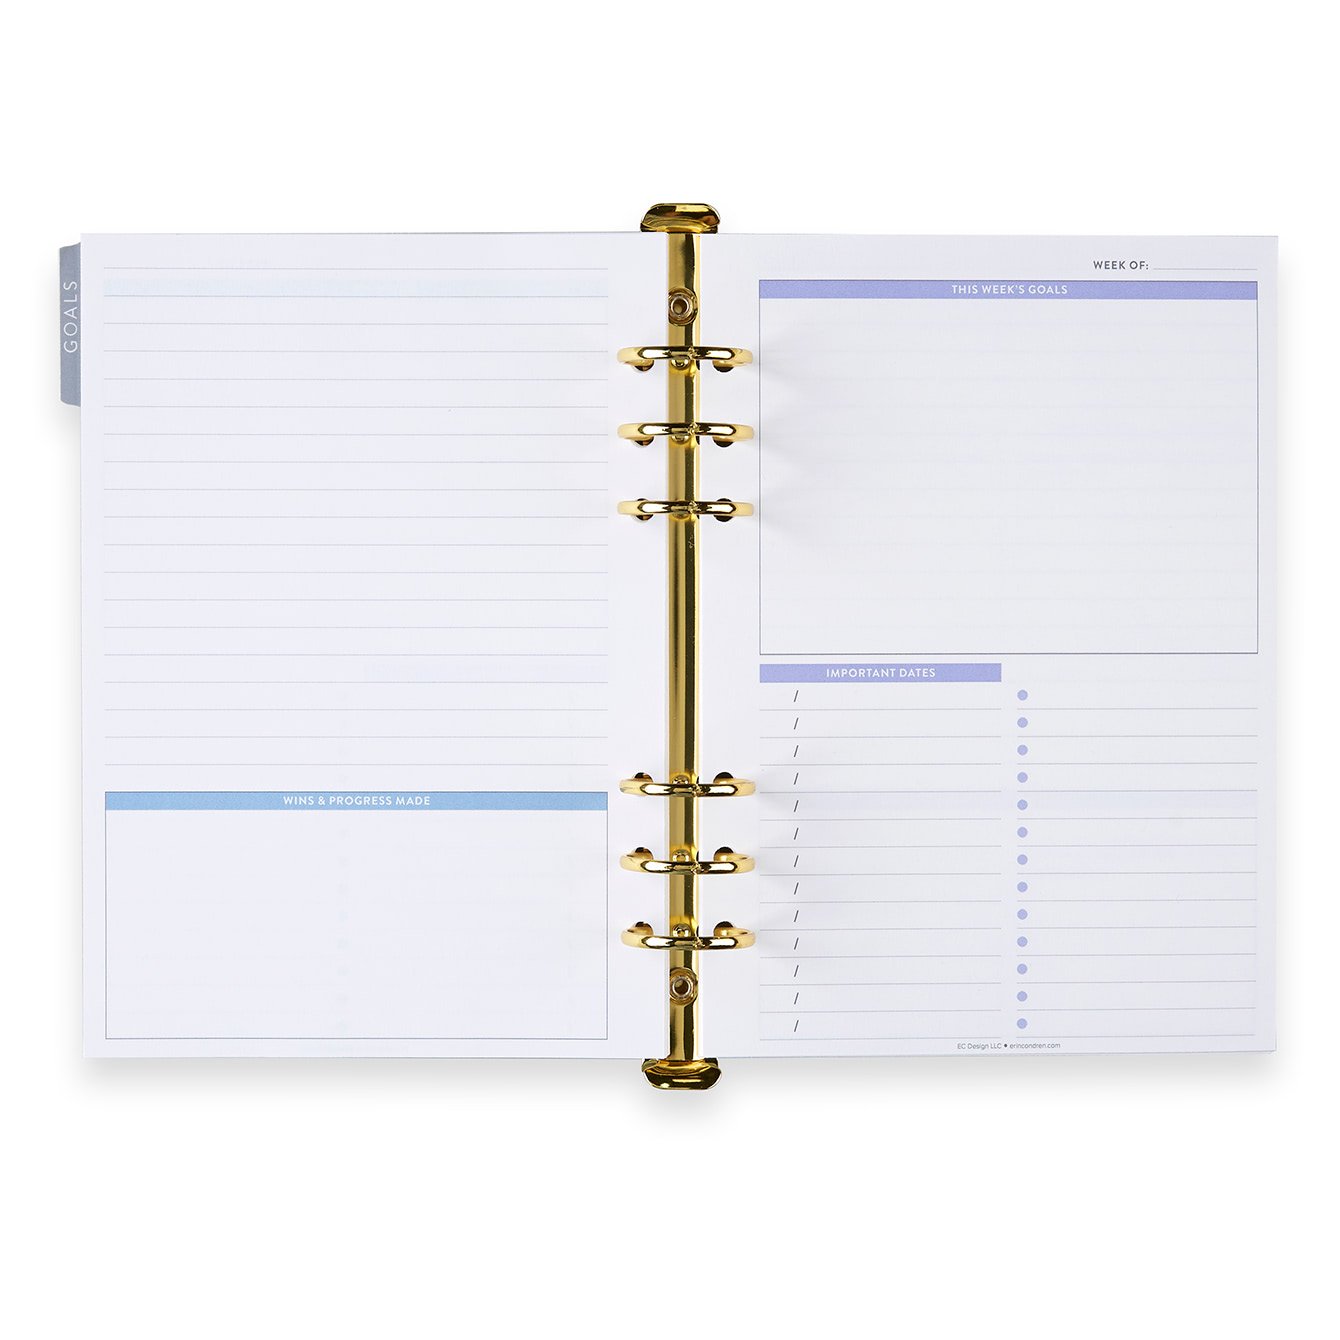 Projects & Goals Tracker Notebook - A5